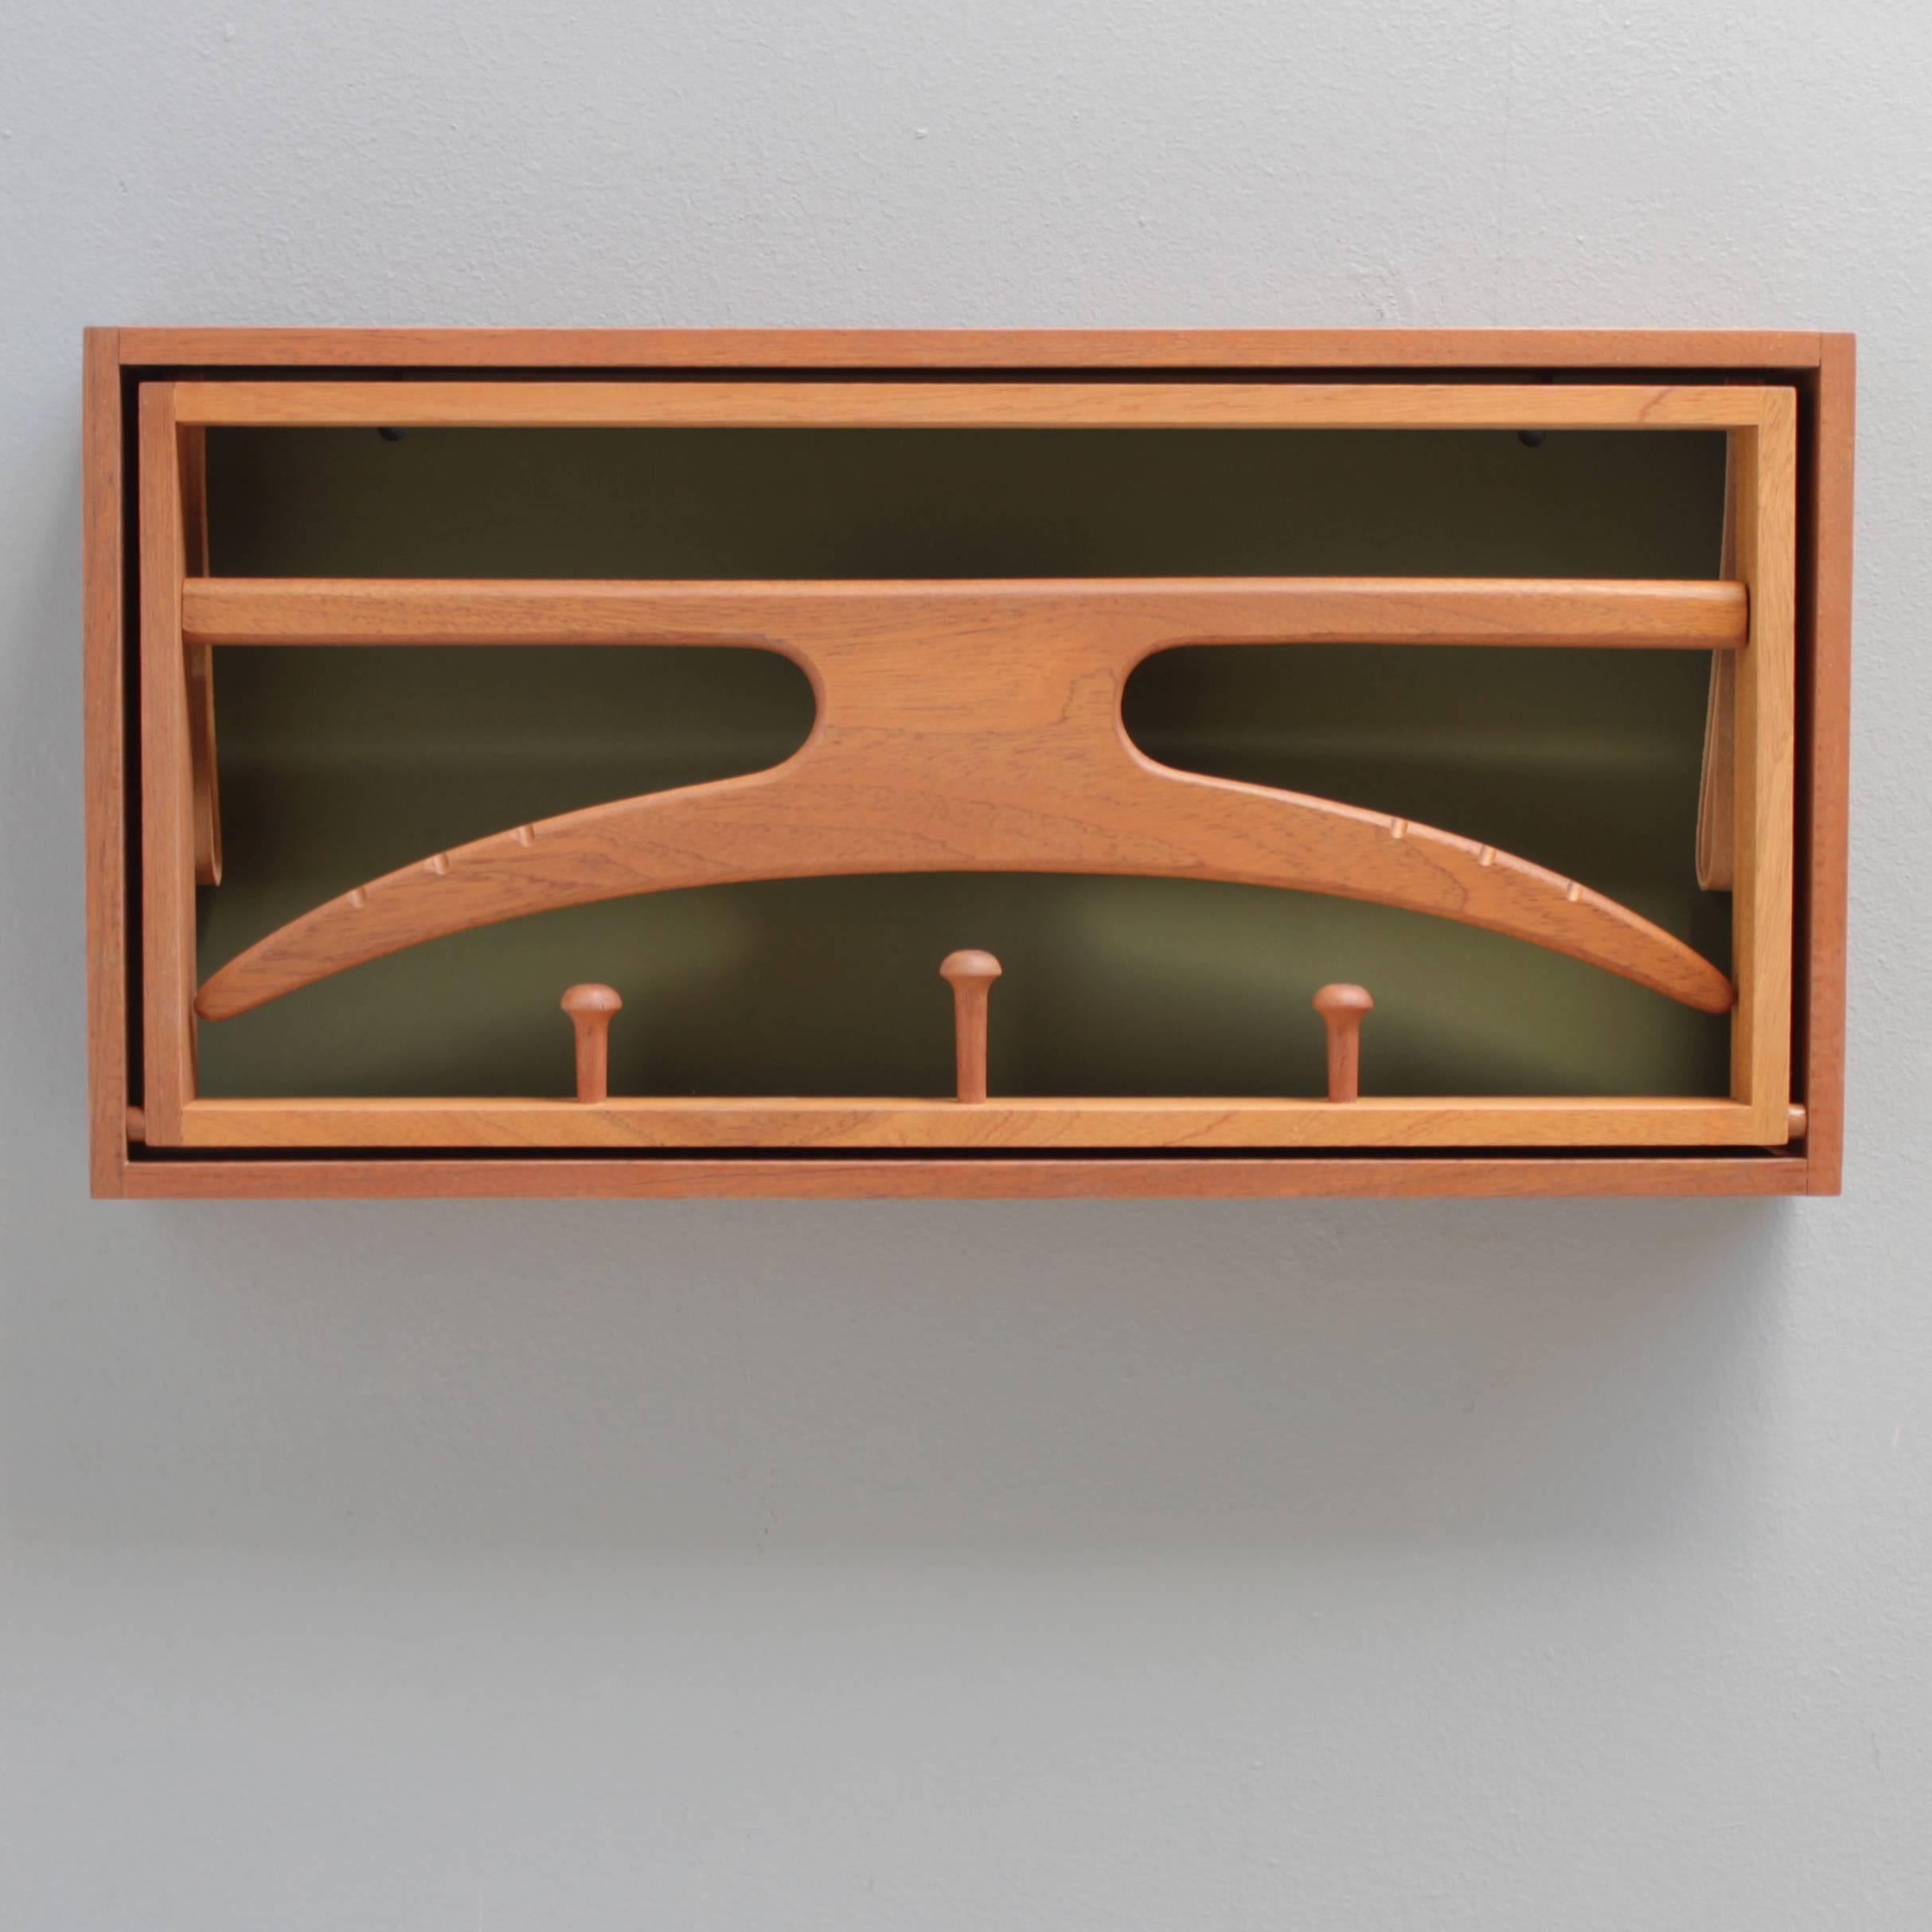 Valet by Adam Hoff and Poul Østergaard for Virum Möbelsnedkeri, Rasmussen & Brygger. Materials: Teak wood, natural leather straps and green formica back. In excellent condition, seemingly never used. Dimensions: depth 2.55 in. (6,5 cm), width